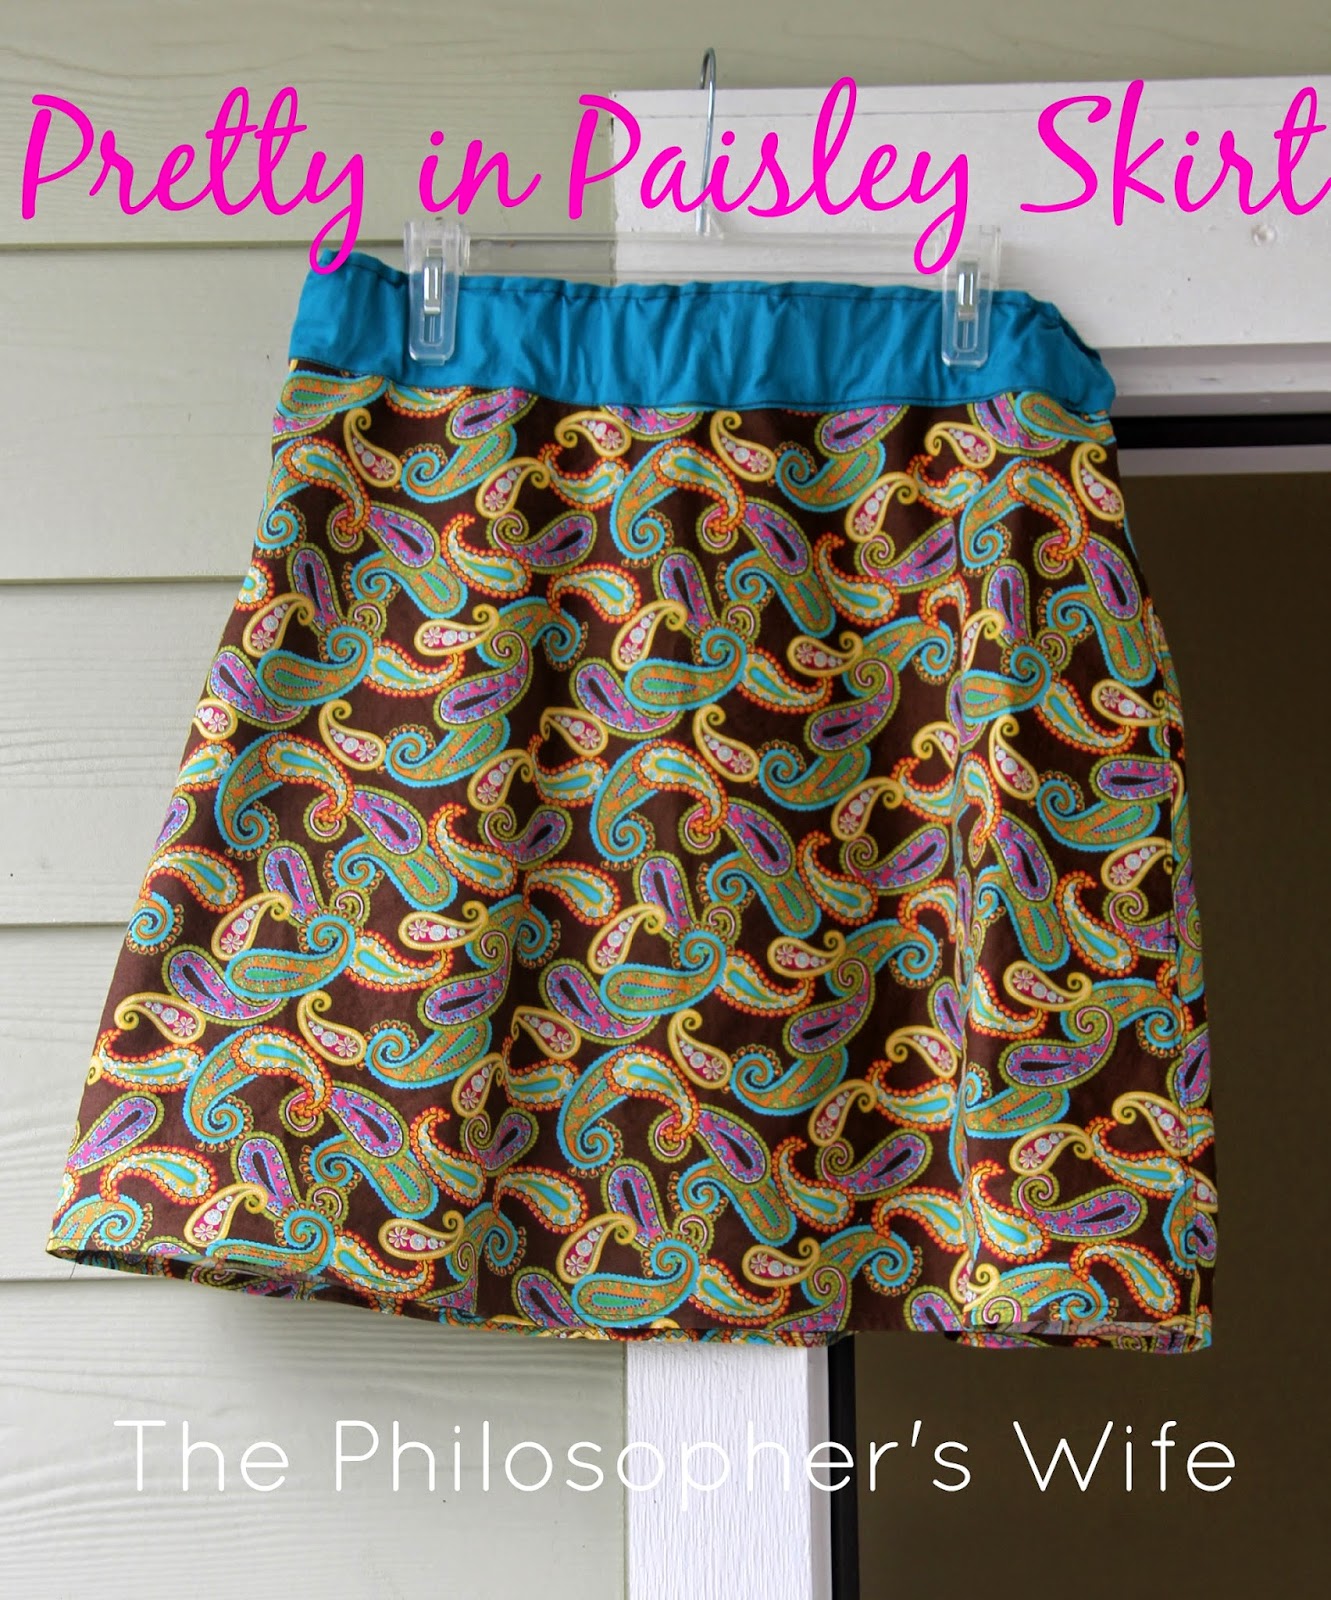 The Philosopher's Wife: Pretty in Paisley Skirt